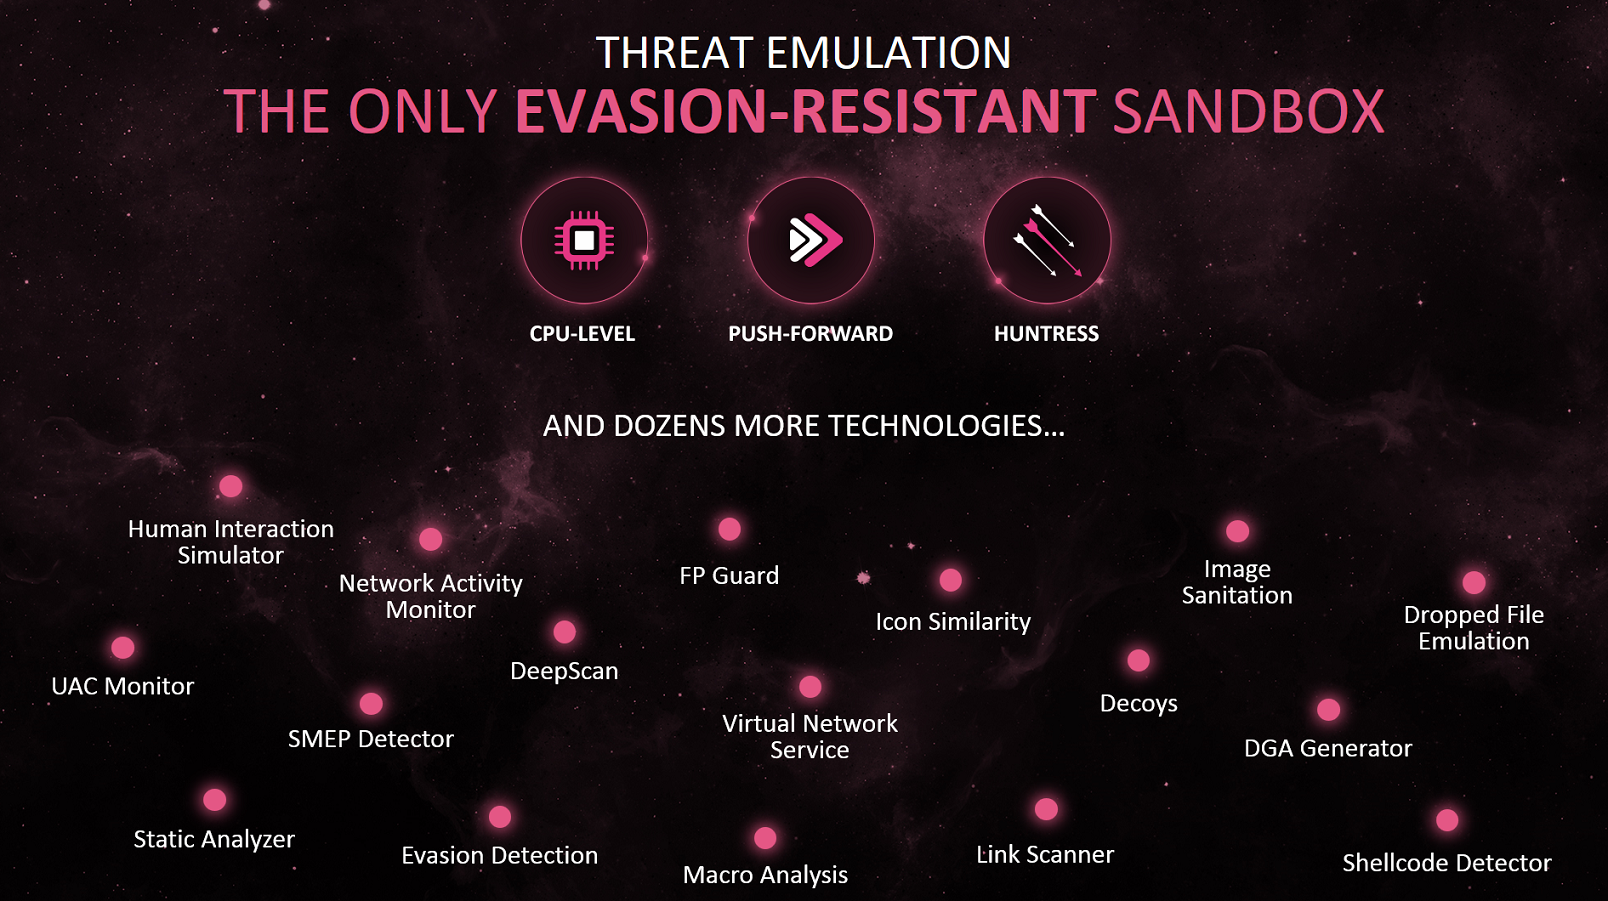 How our cybersecurity solution threat emulatio sandbox protects your organization